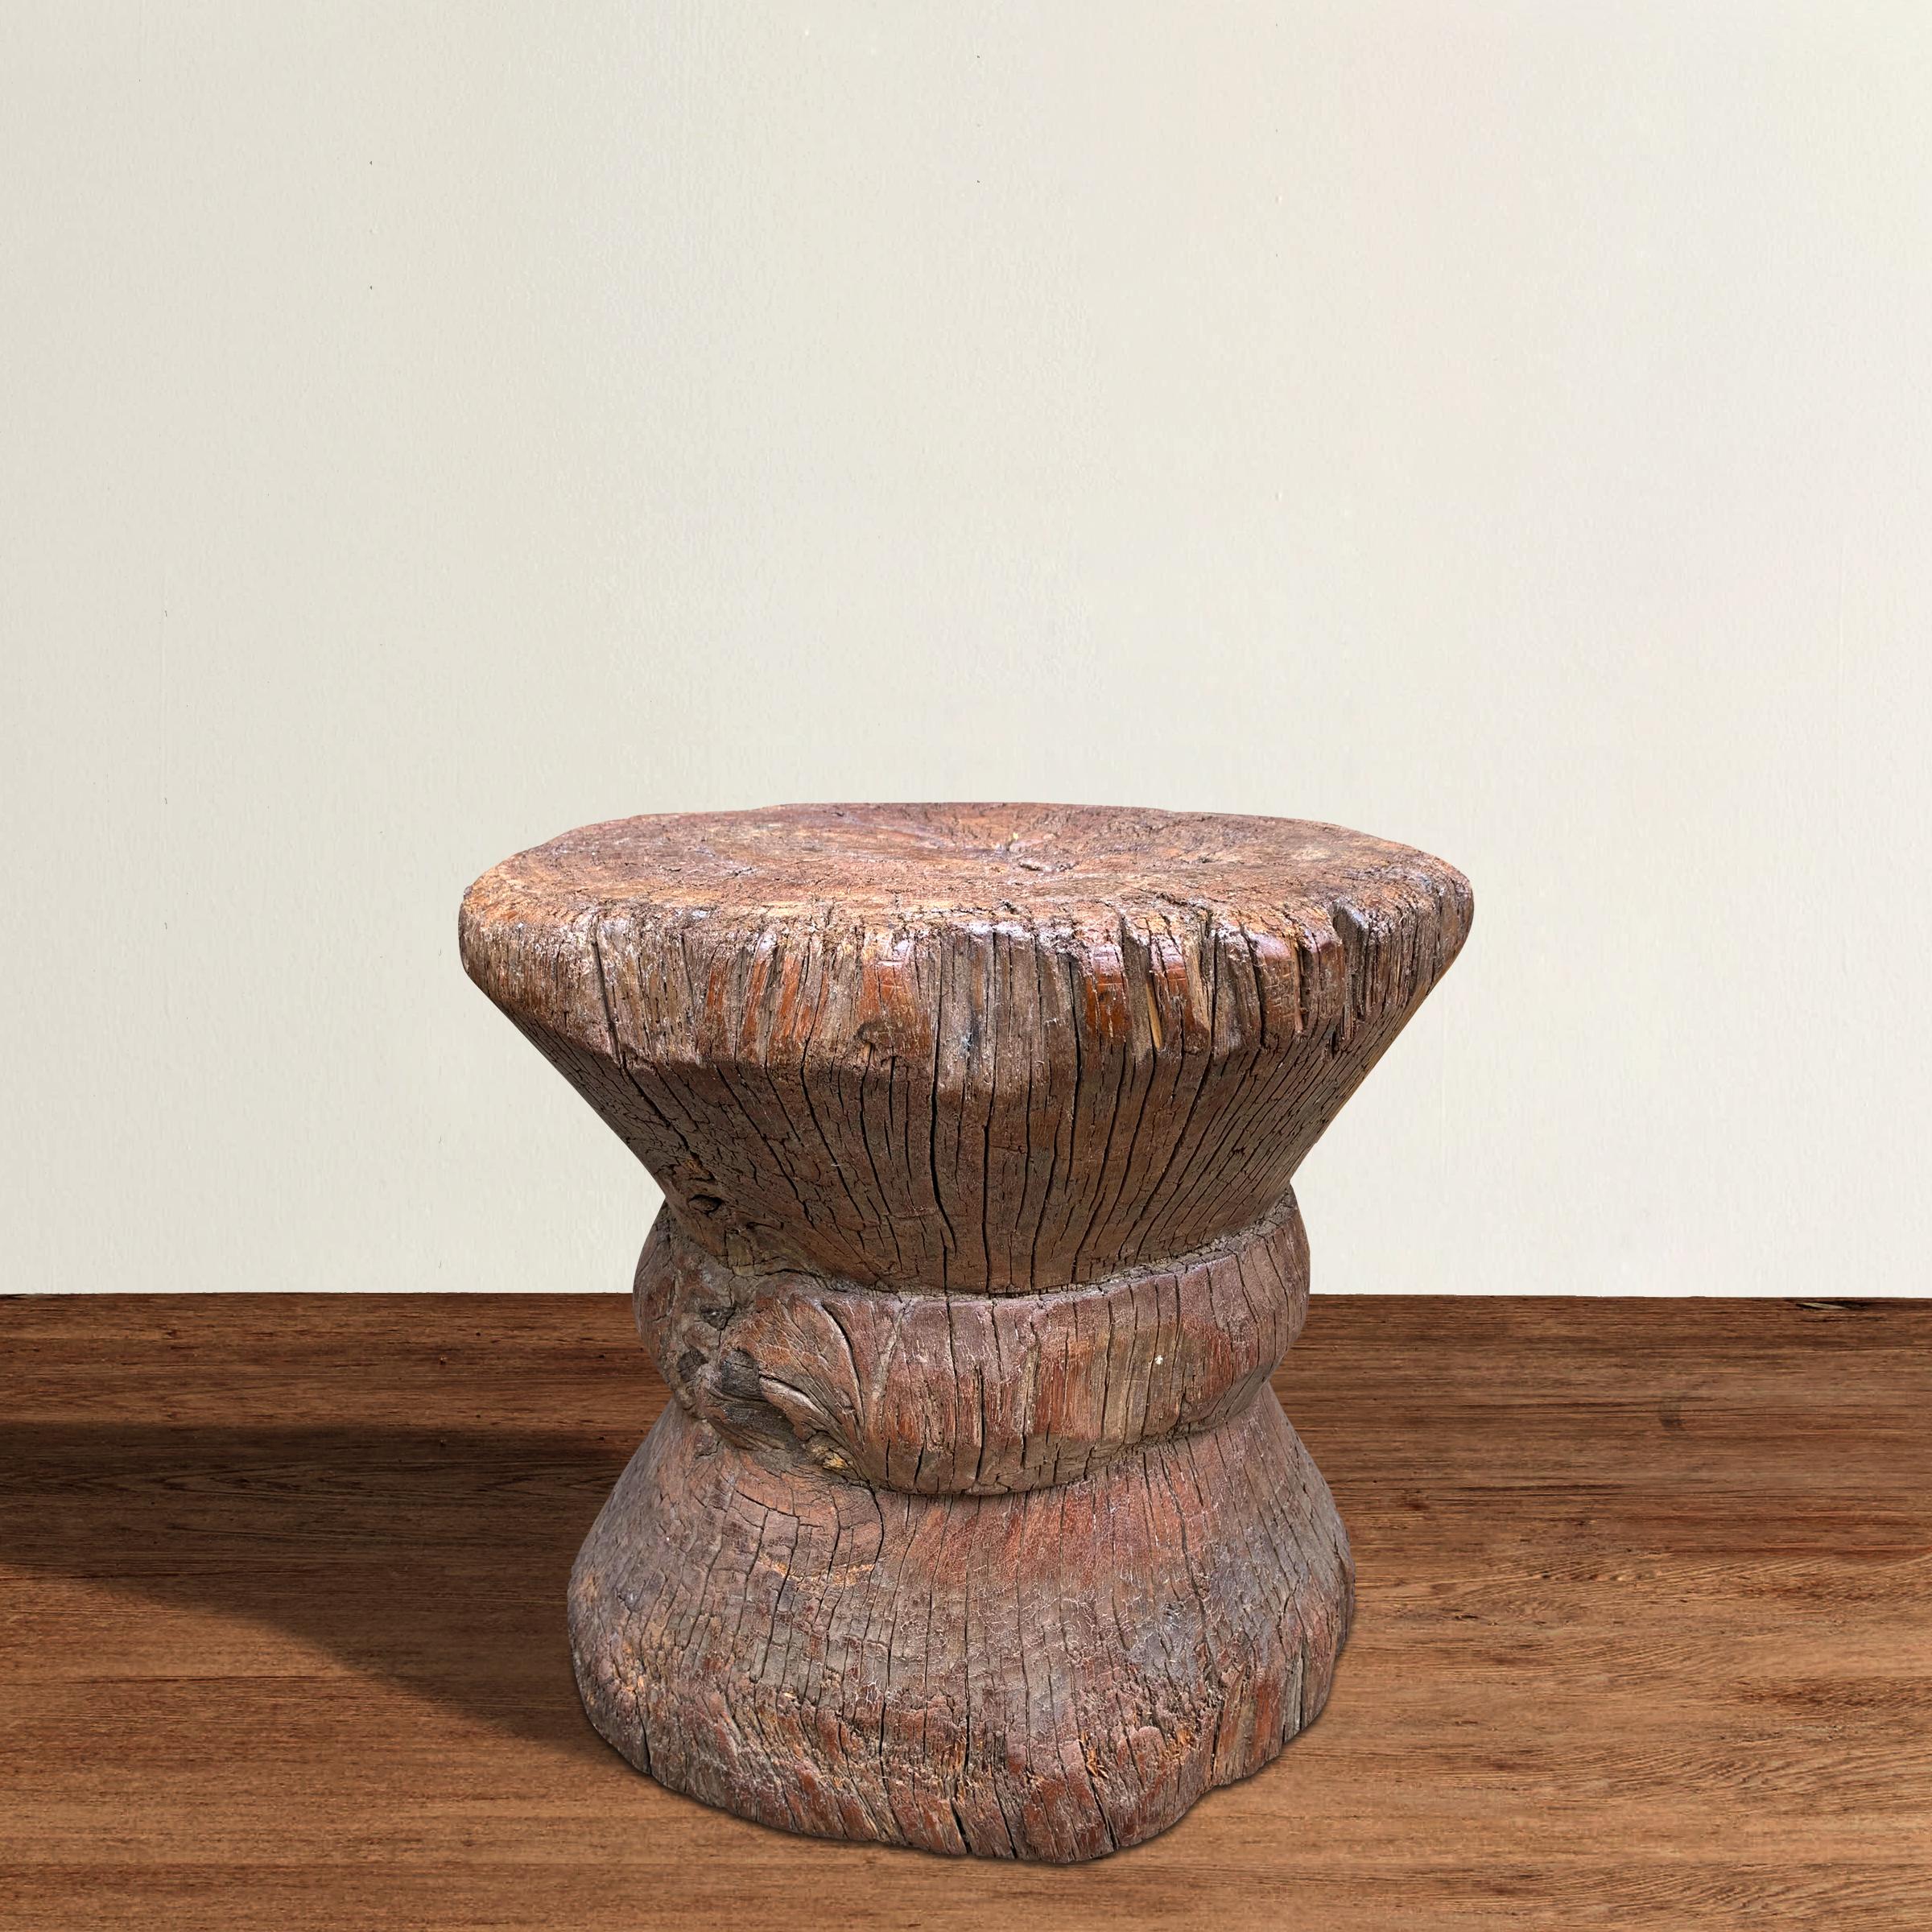 An extraordinary 19th century or earlier primitive carved wood stool or side table with a wonderful hour-glass form. A natural imperfection in the tree trunk adds a bit of wabi-sabi interest on the back side, along with an old iron strap repair.